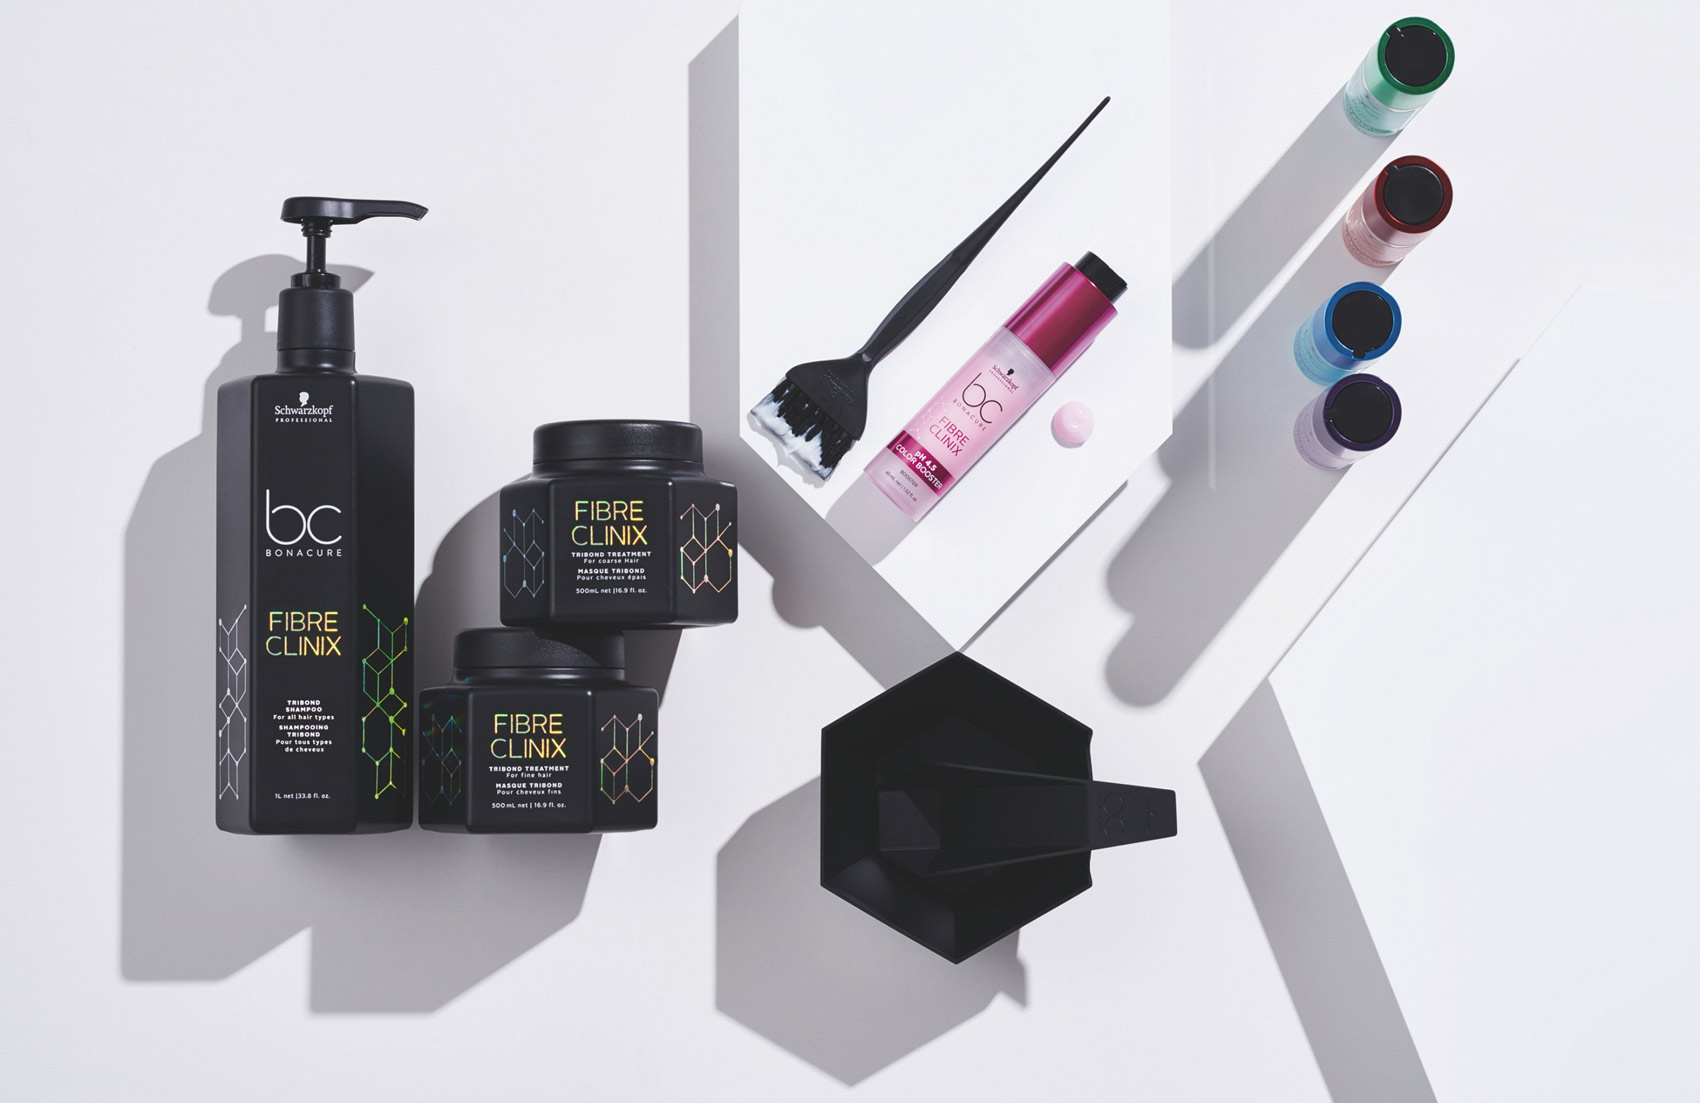 Product renders of the hairdressing salon tools as part of product development range for Schwarzkopf by Simple Design Works